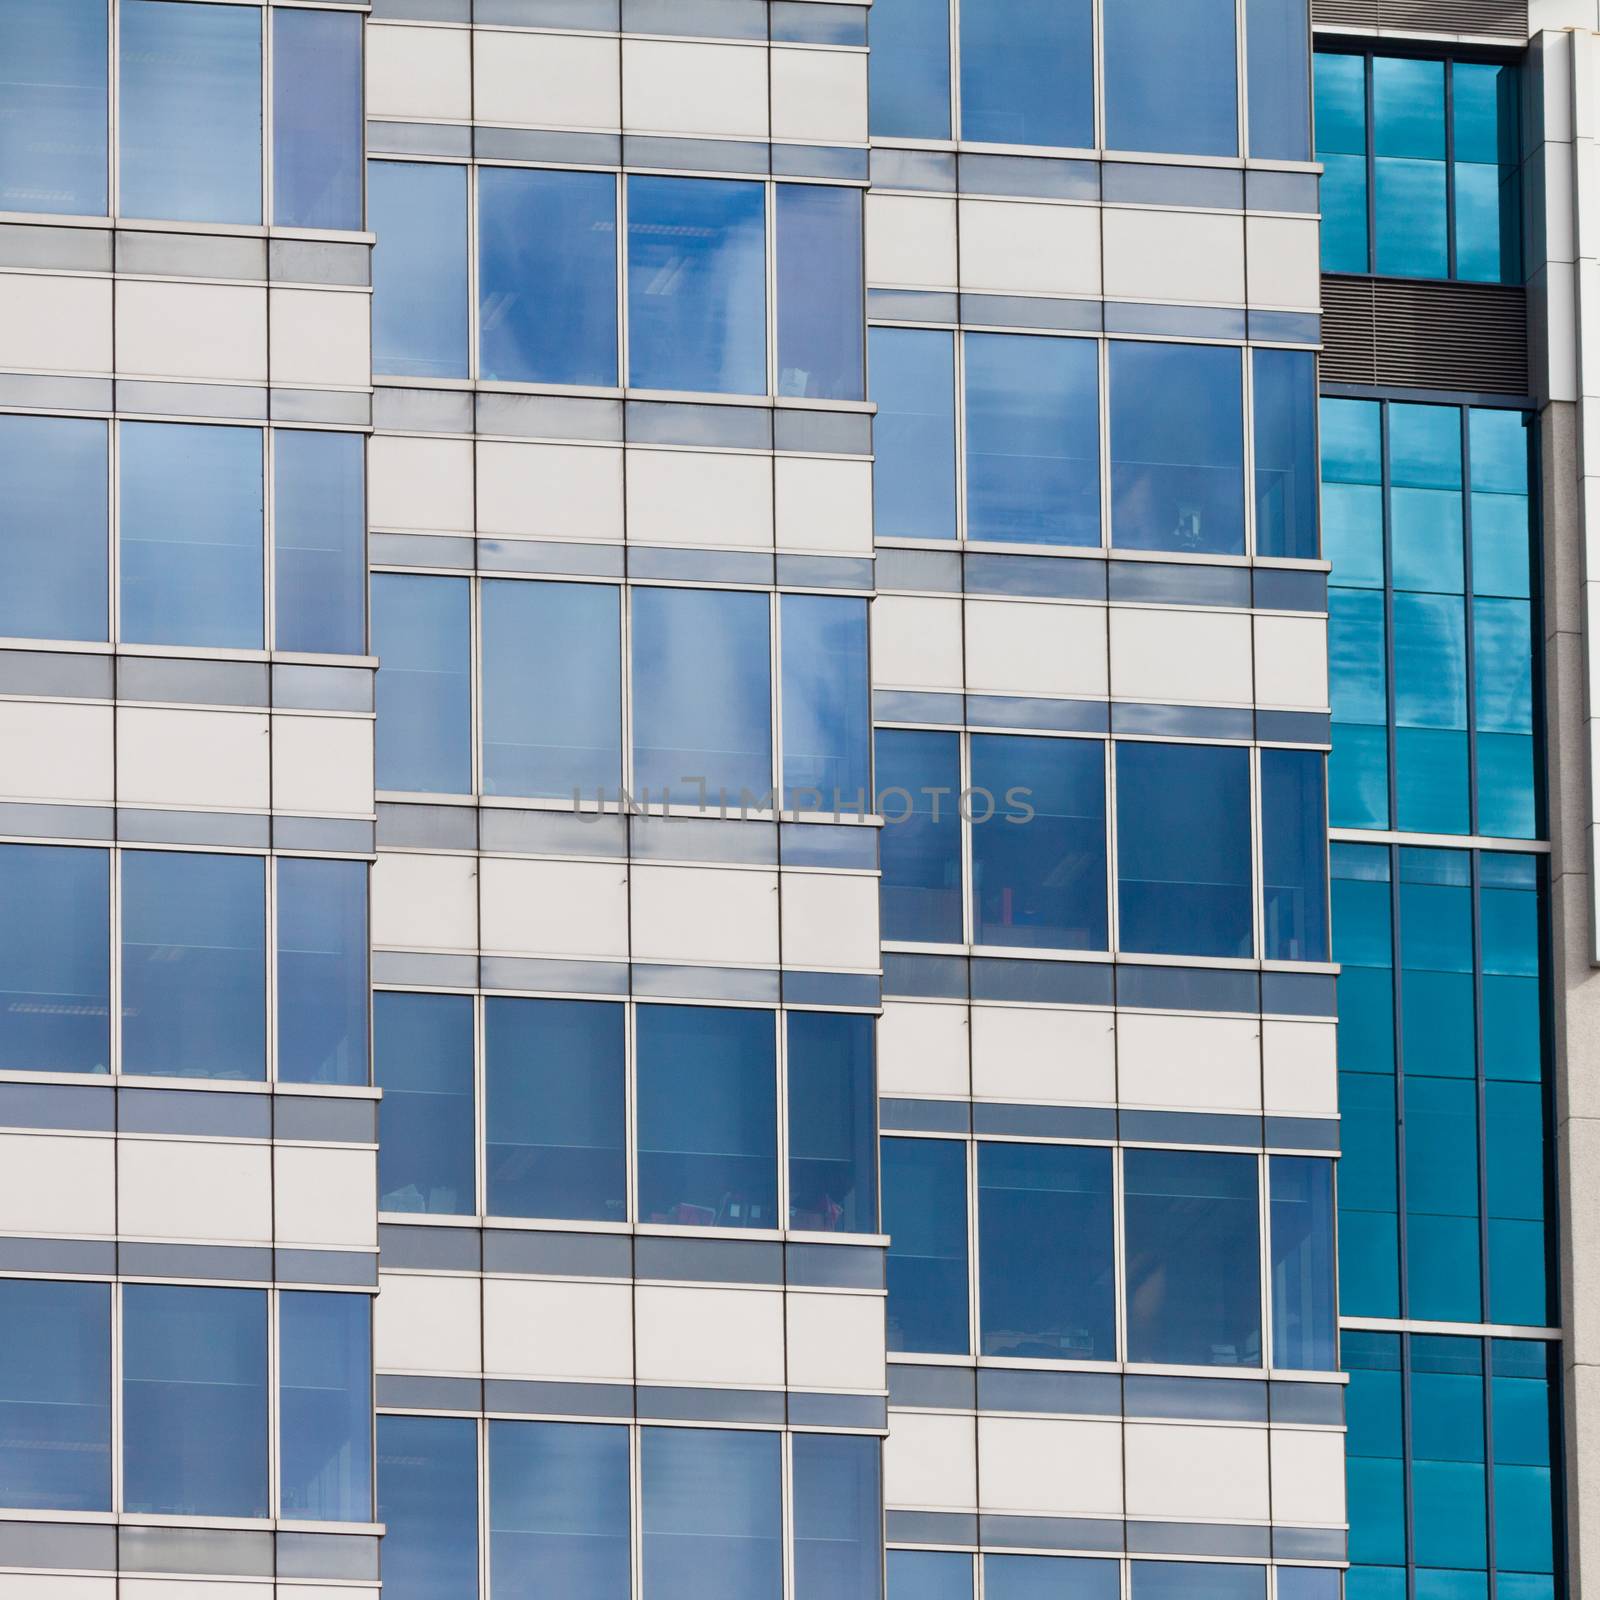 Background pattern of blue window reflections in a modern coporate office building facade